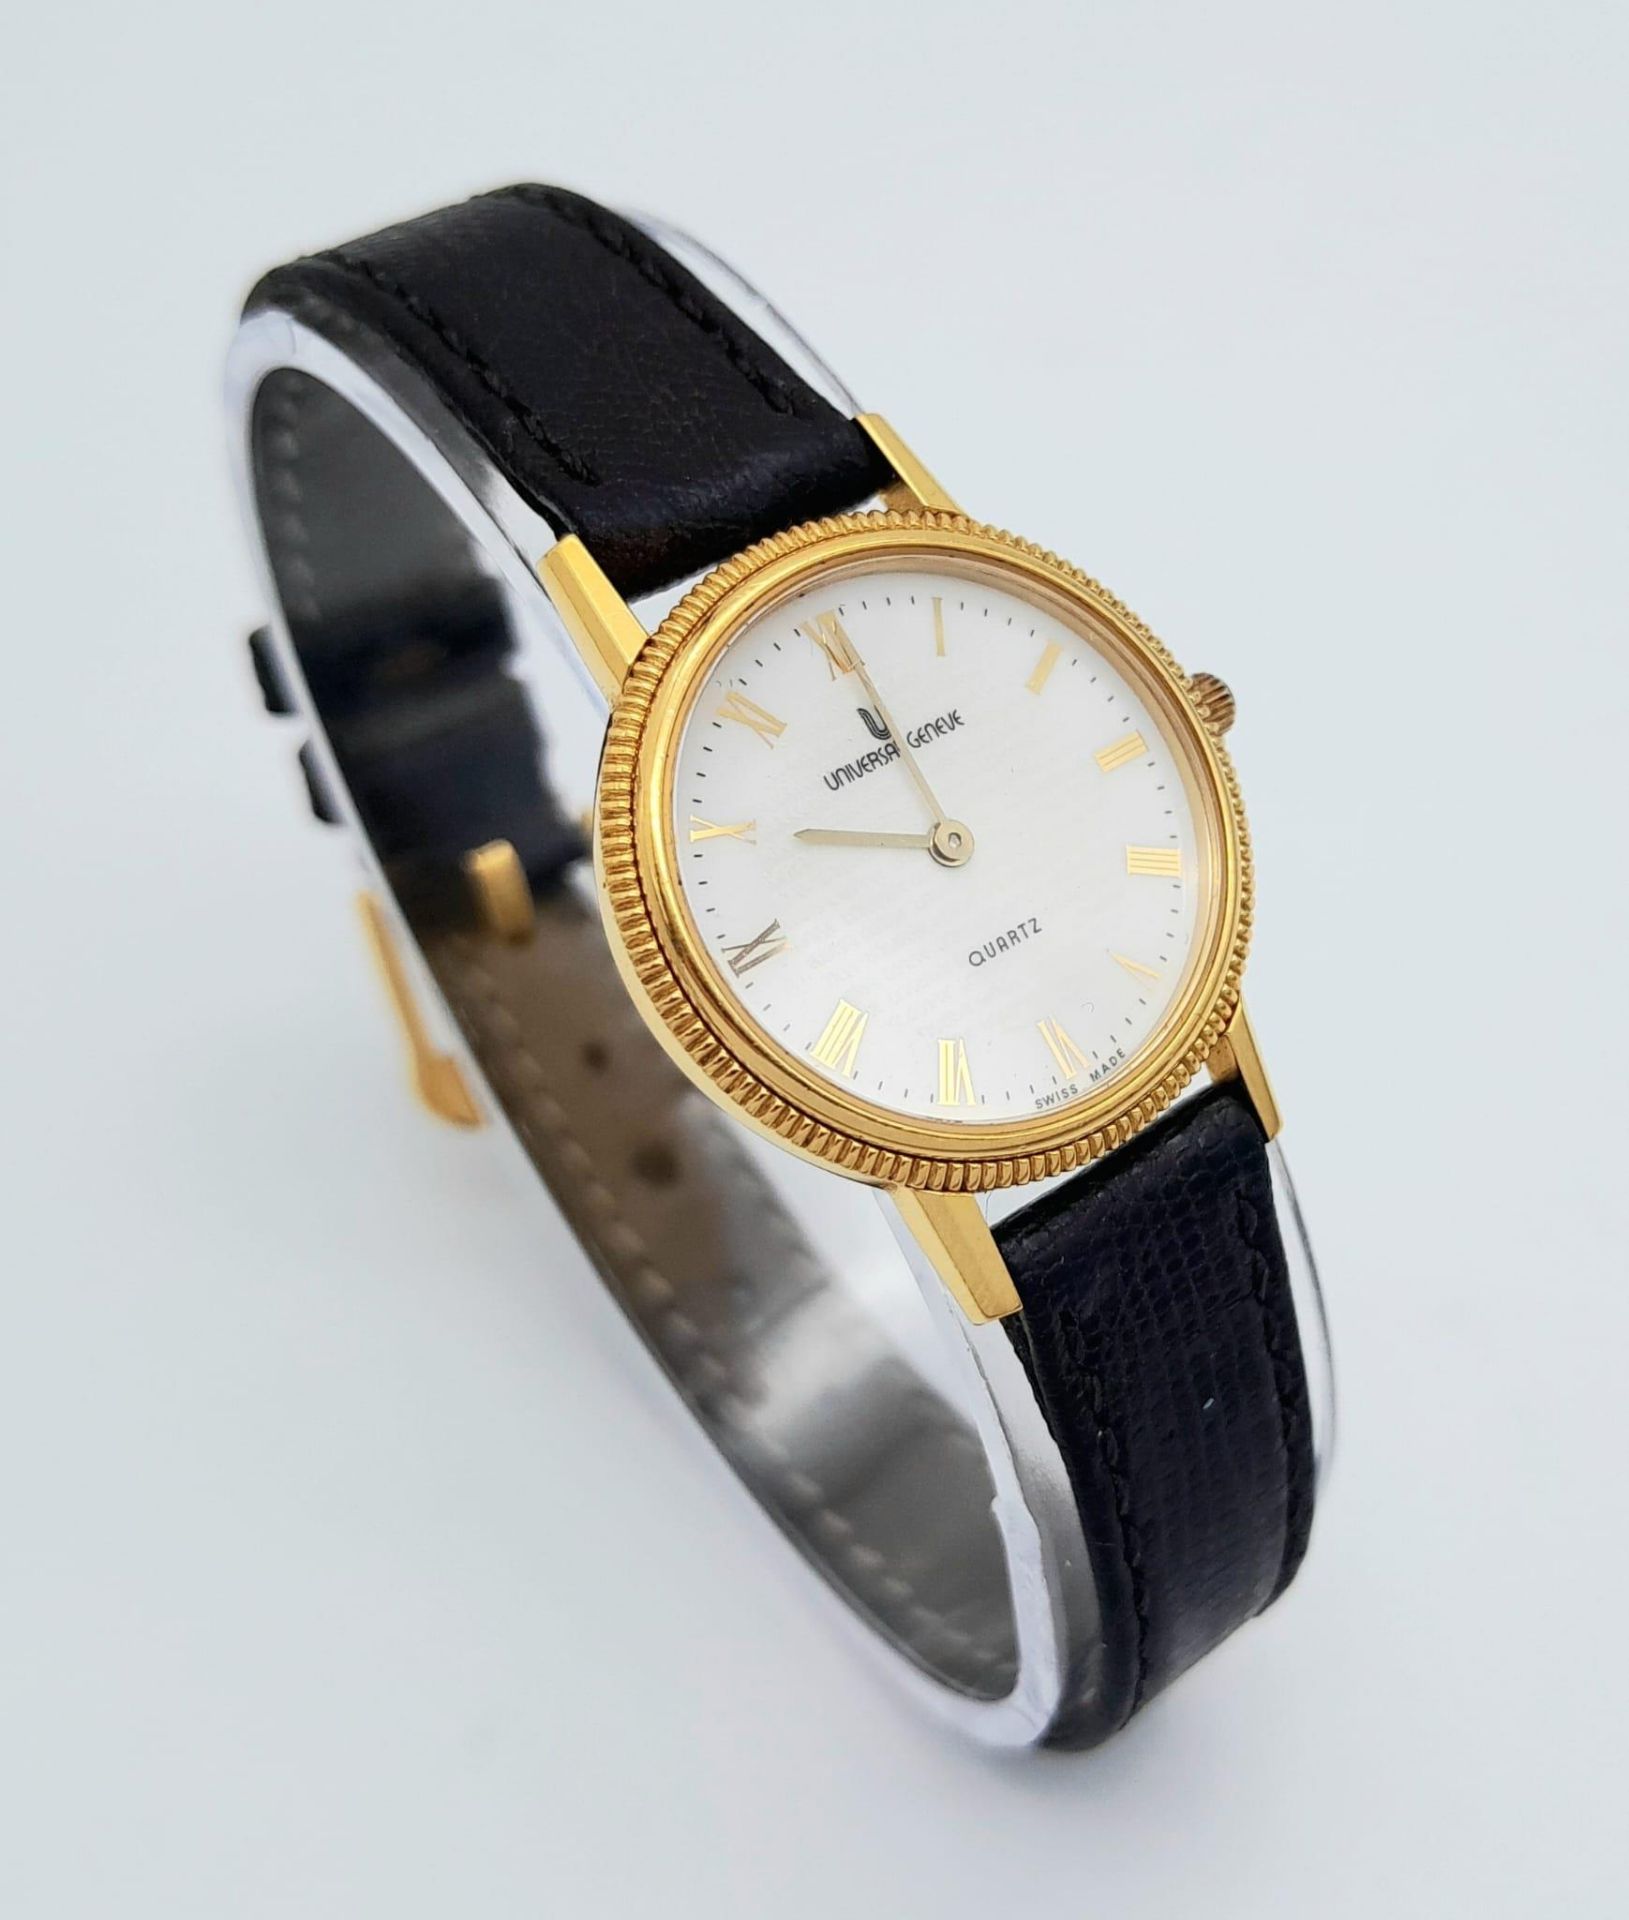 A Gold Plated Universal Quartz Ladies Watch. Black leather strap. Gold plated case - 23mm. White - Image 4 of 12